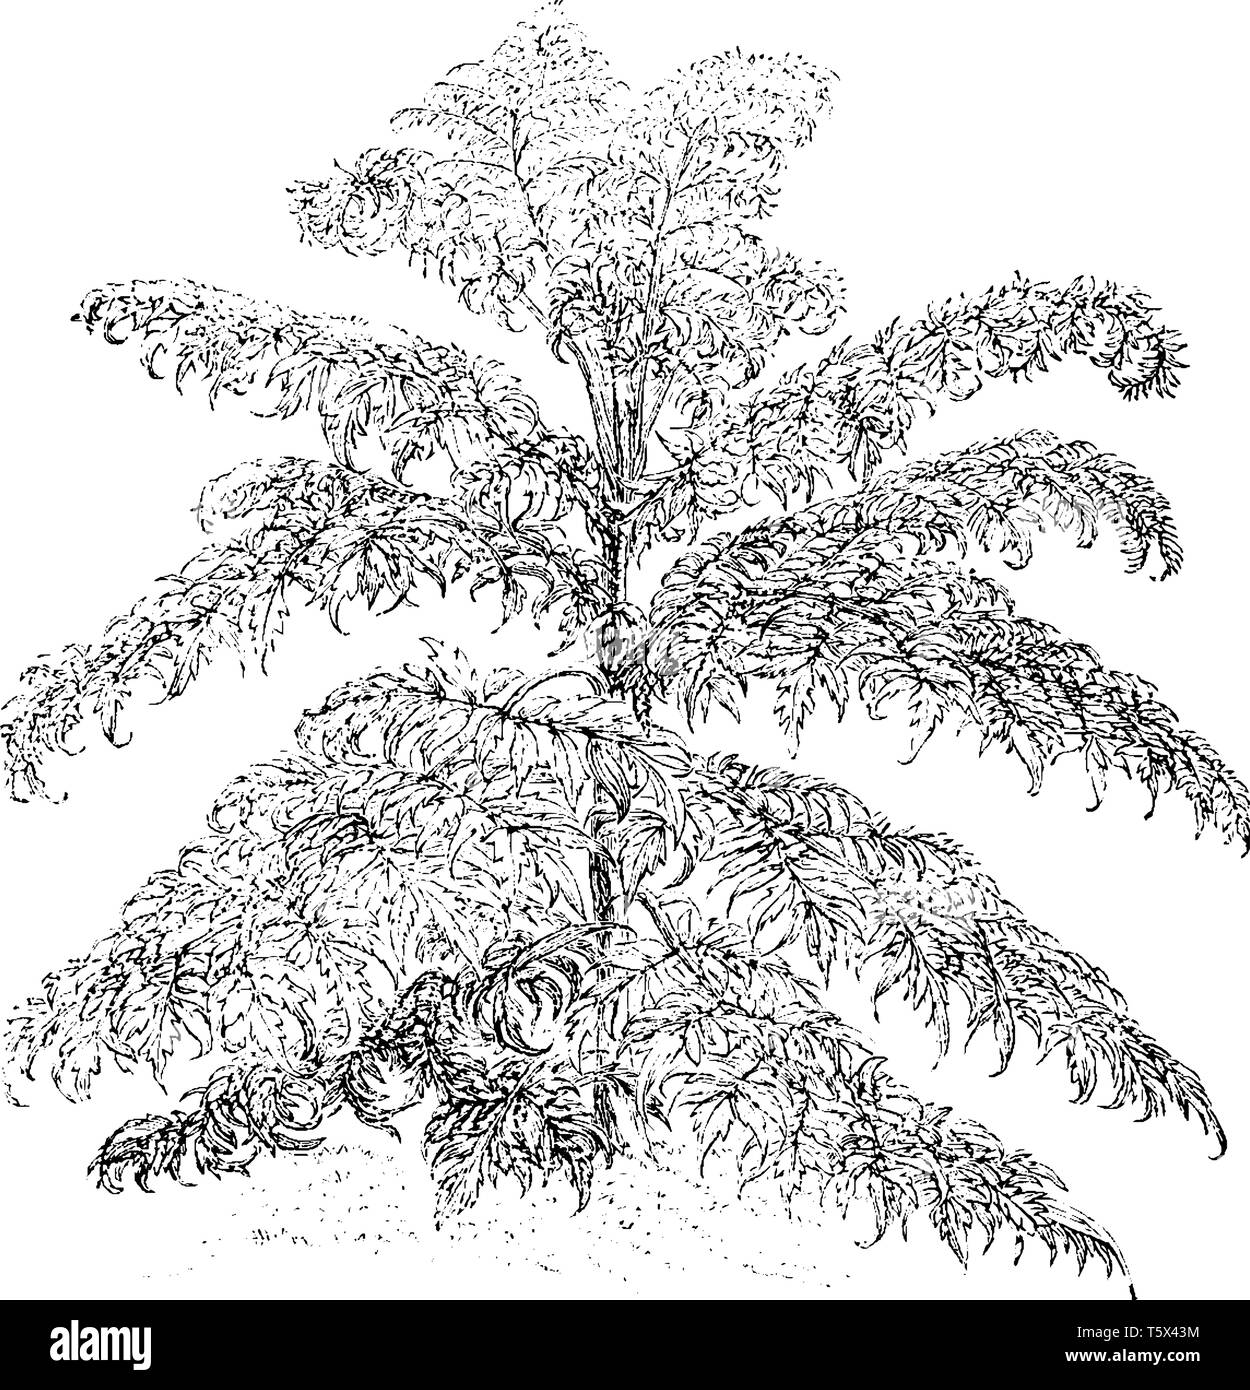 The Rhus Glabra Laciniata plant leaves are alternate, compound with 11-31 leaflets, with a serrated margin, vintage line drawing or engraving illustra Stock Vector